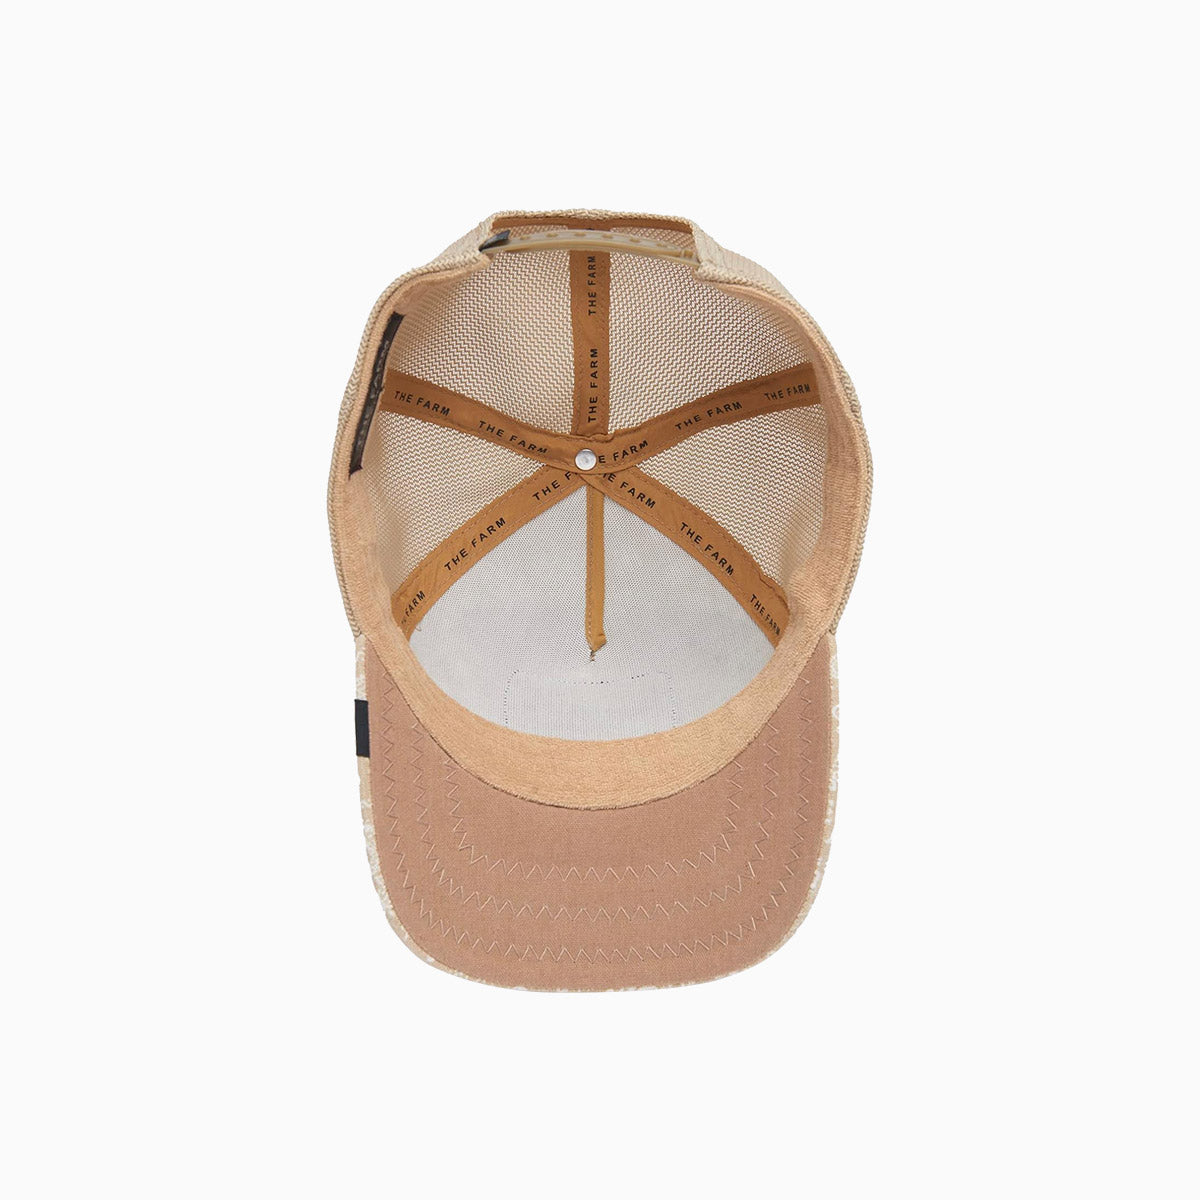 goorin-bros-the-sign-o-the-times-trucker-hat-101-0946-tan